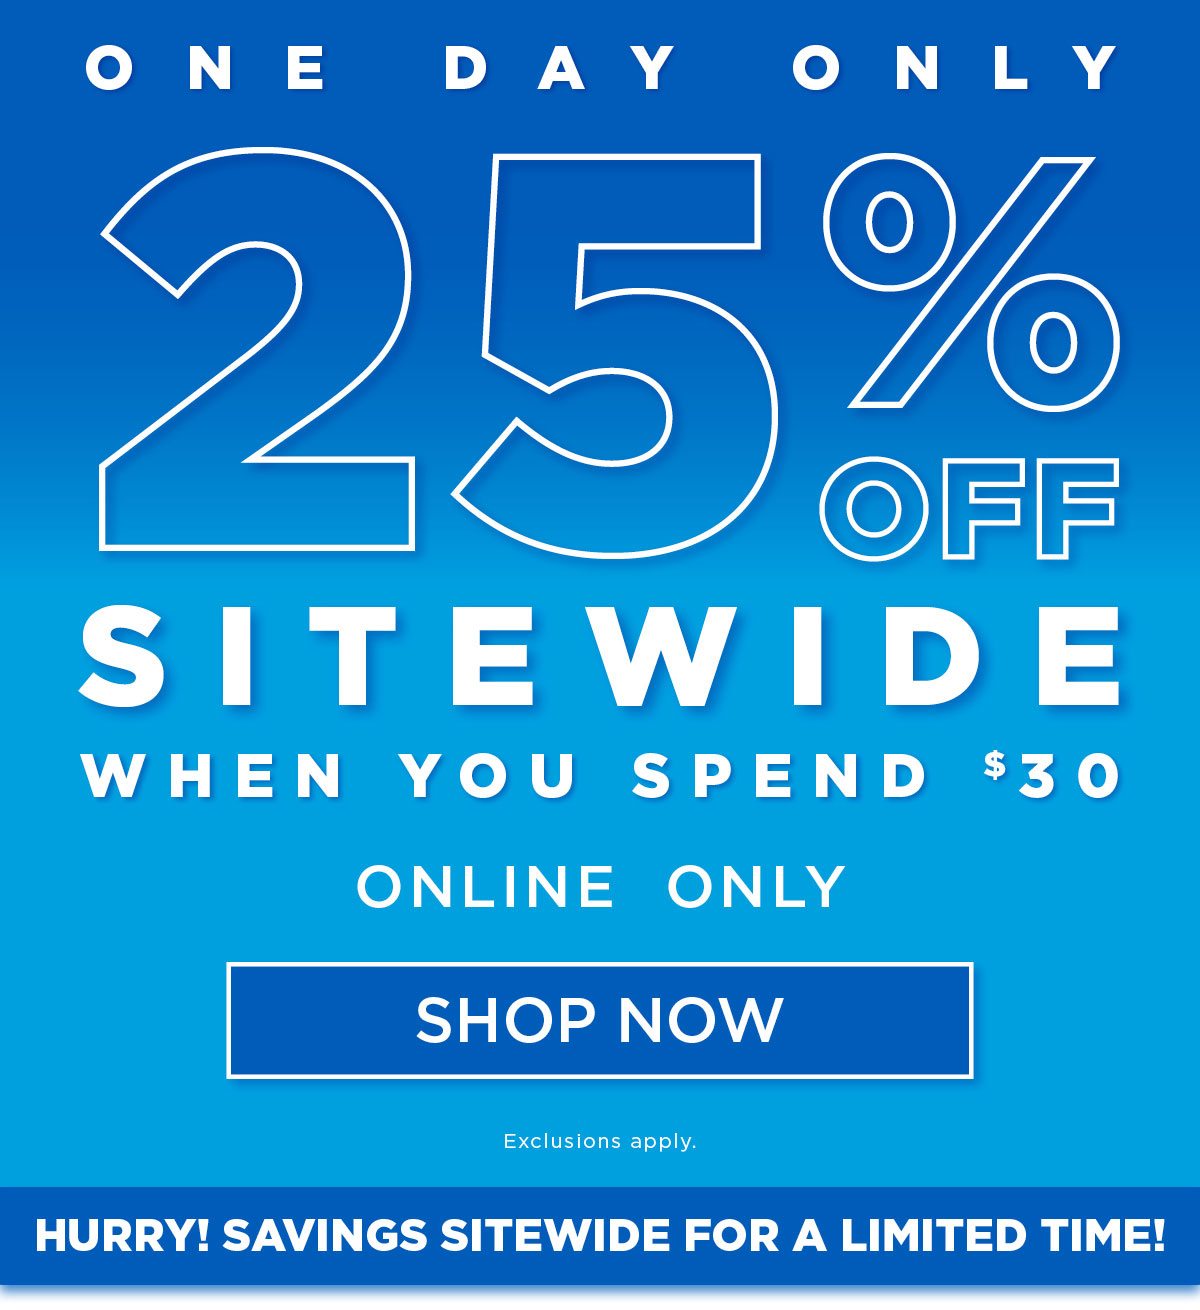 25% off Sitewide when you spend $30 or more!